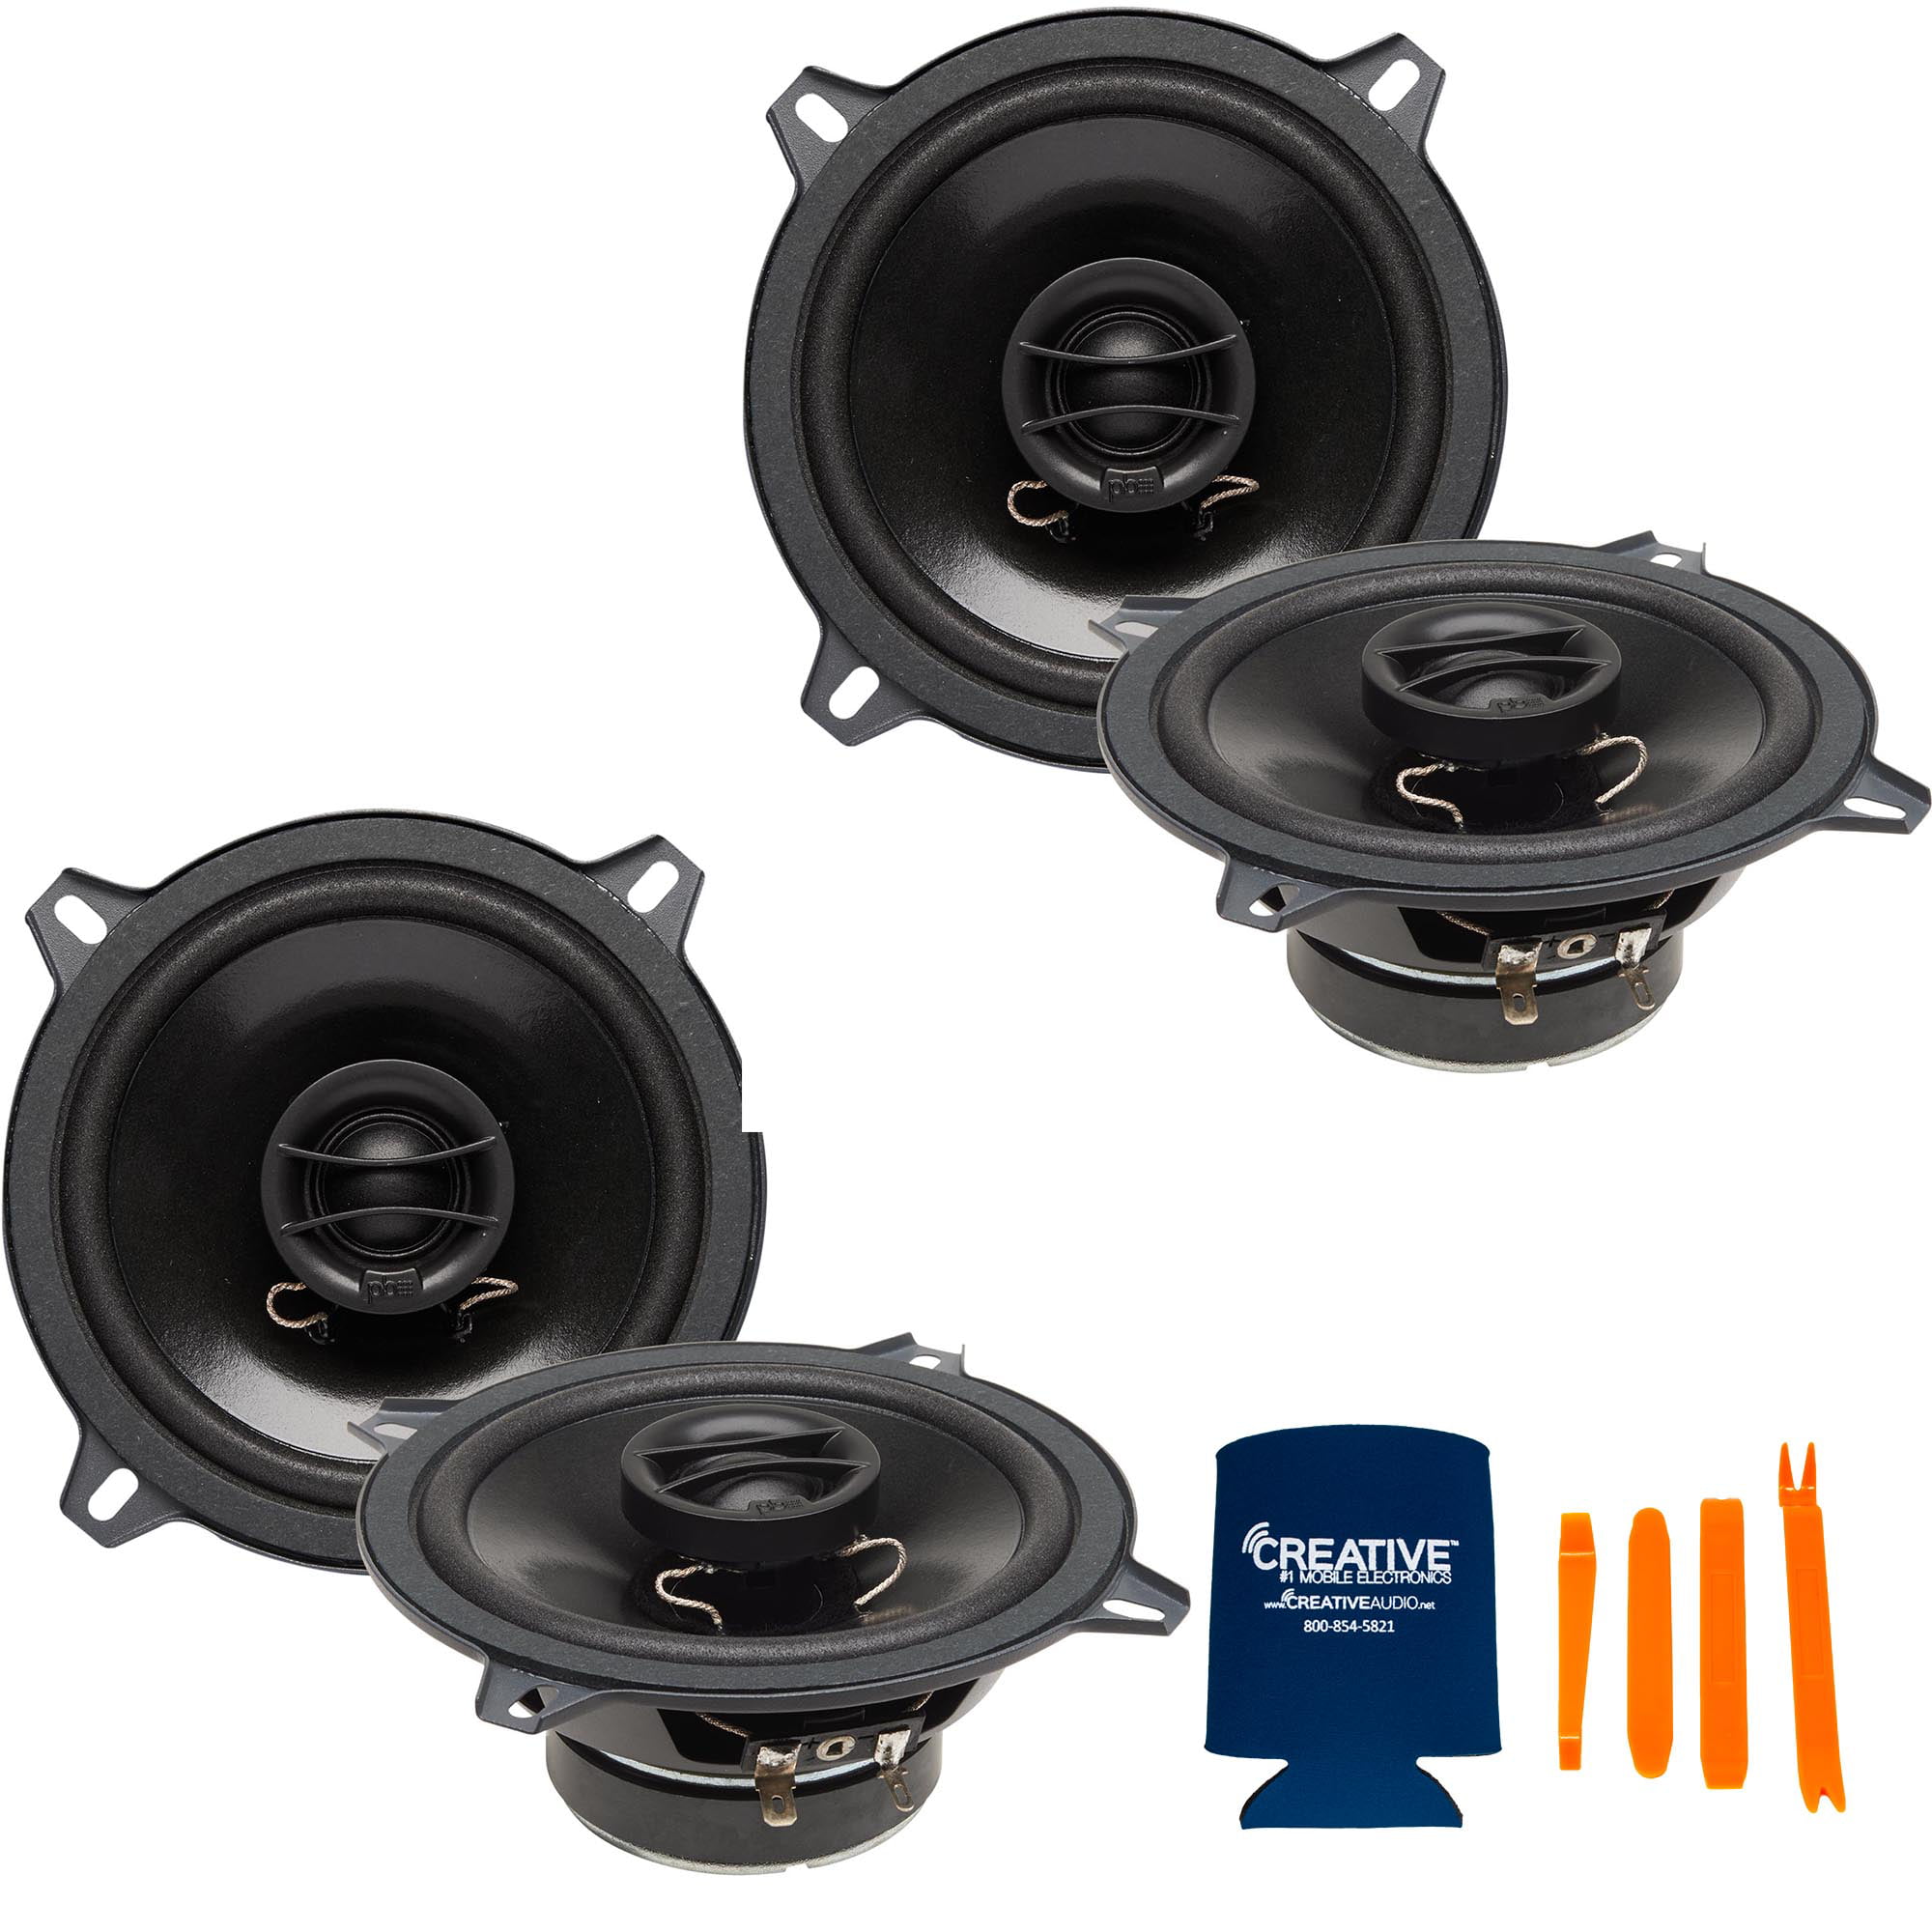 New 5" 5.25" Truck Car Replacement Speaker for Various Import Vehicles & More 